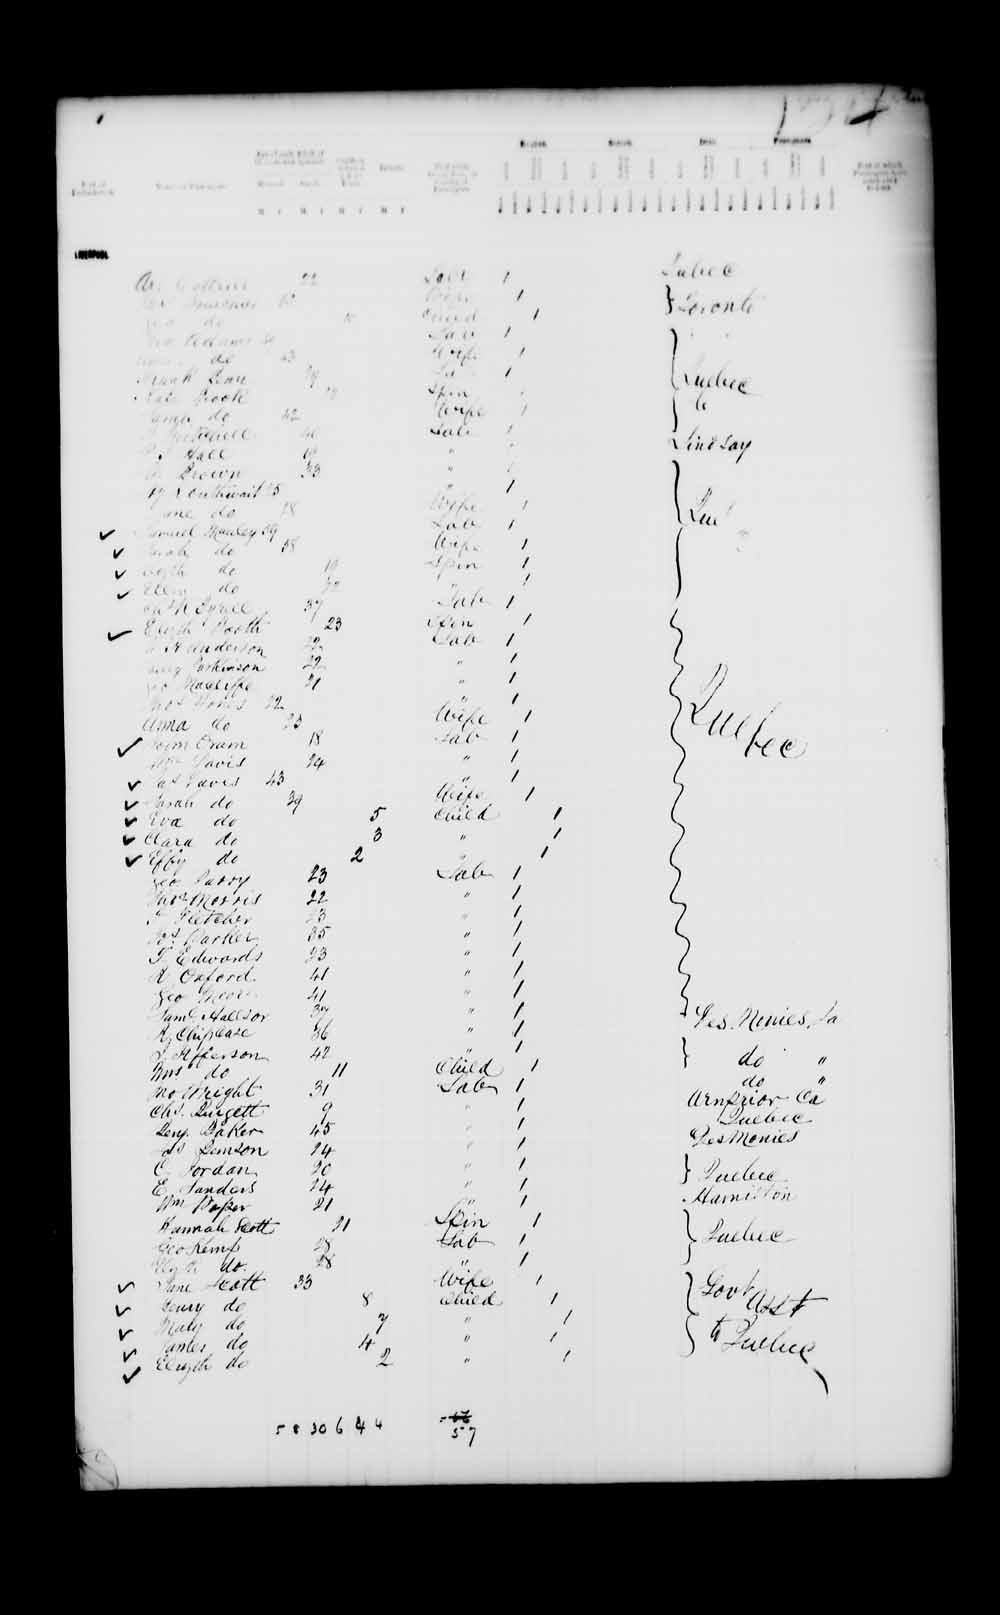 Digitized page of Passenger Lists for Image No.: e003541213